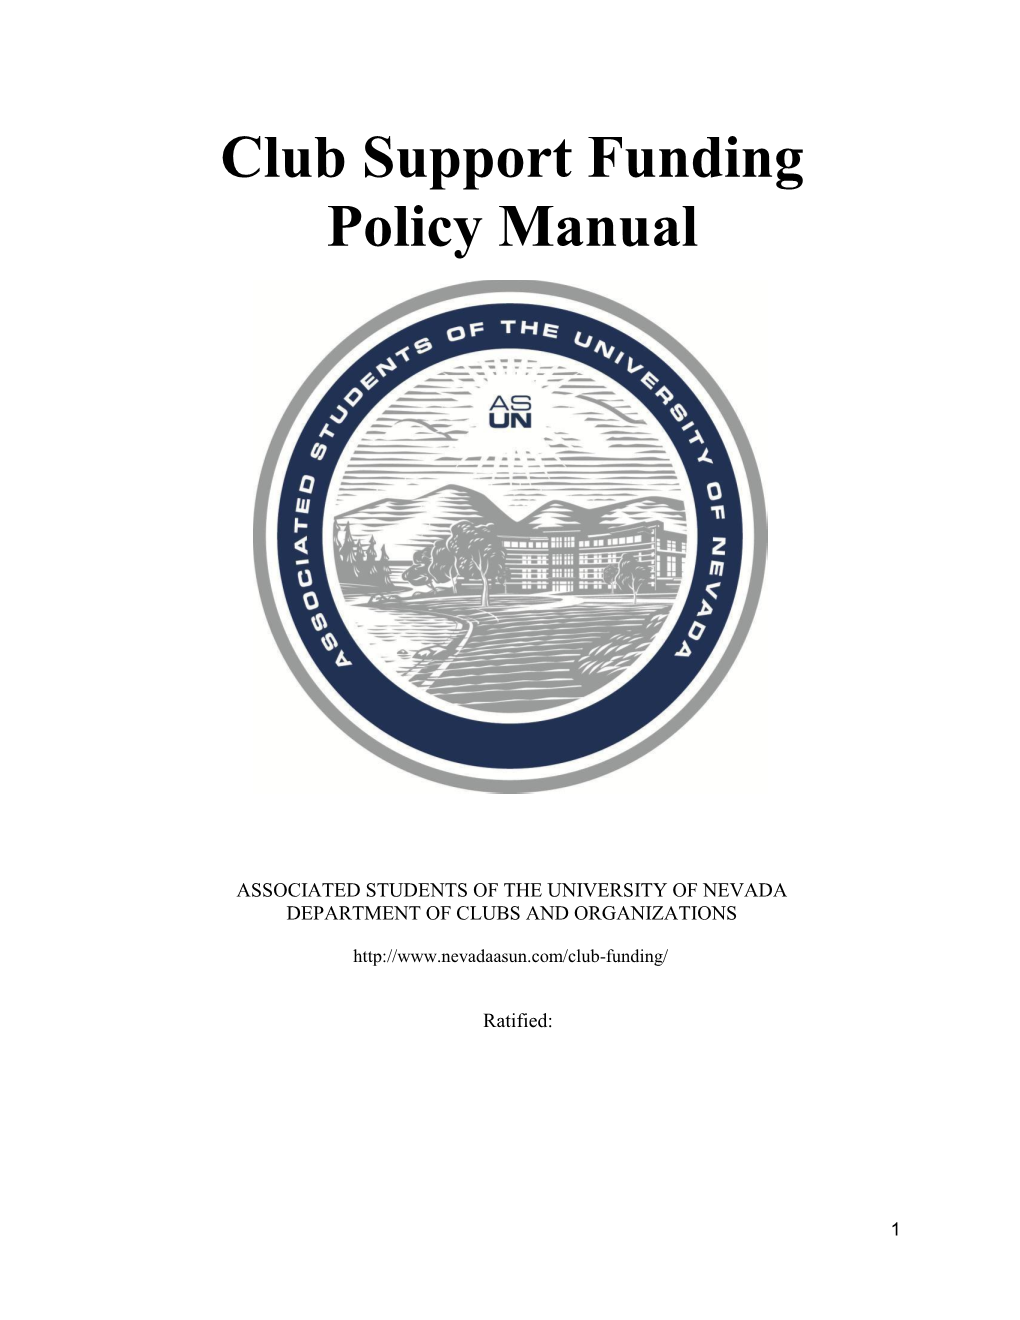 Club Support Funding Policy Manual